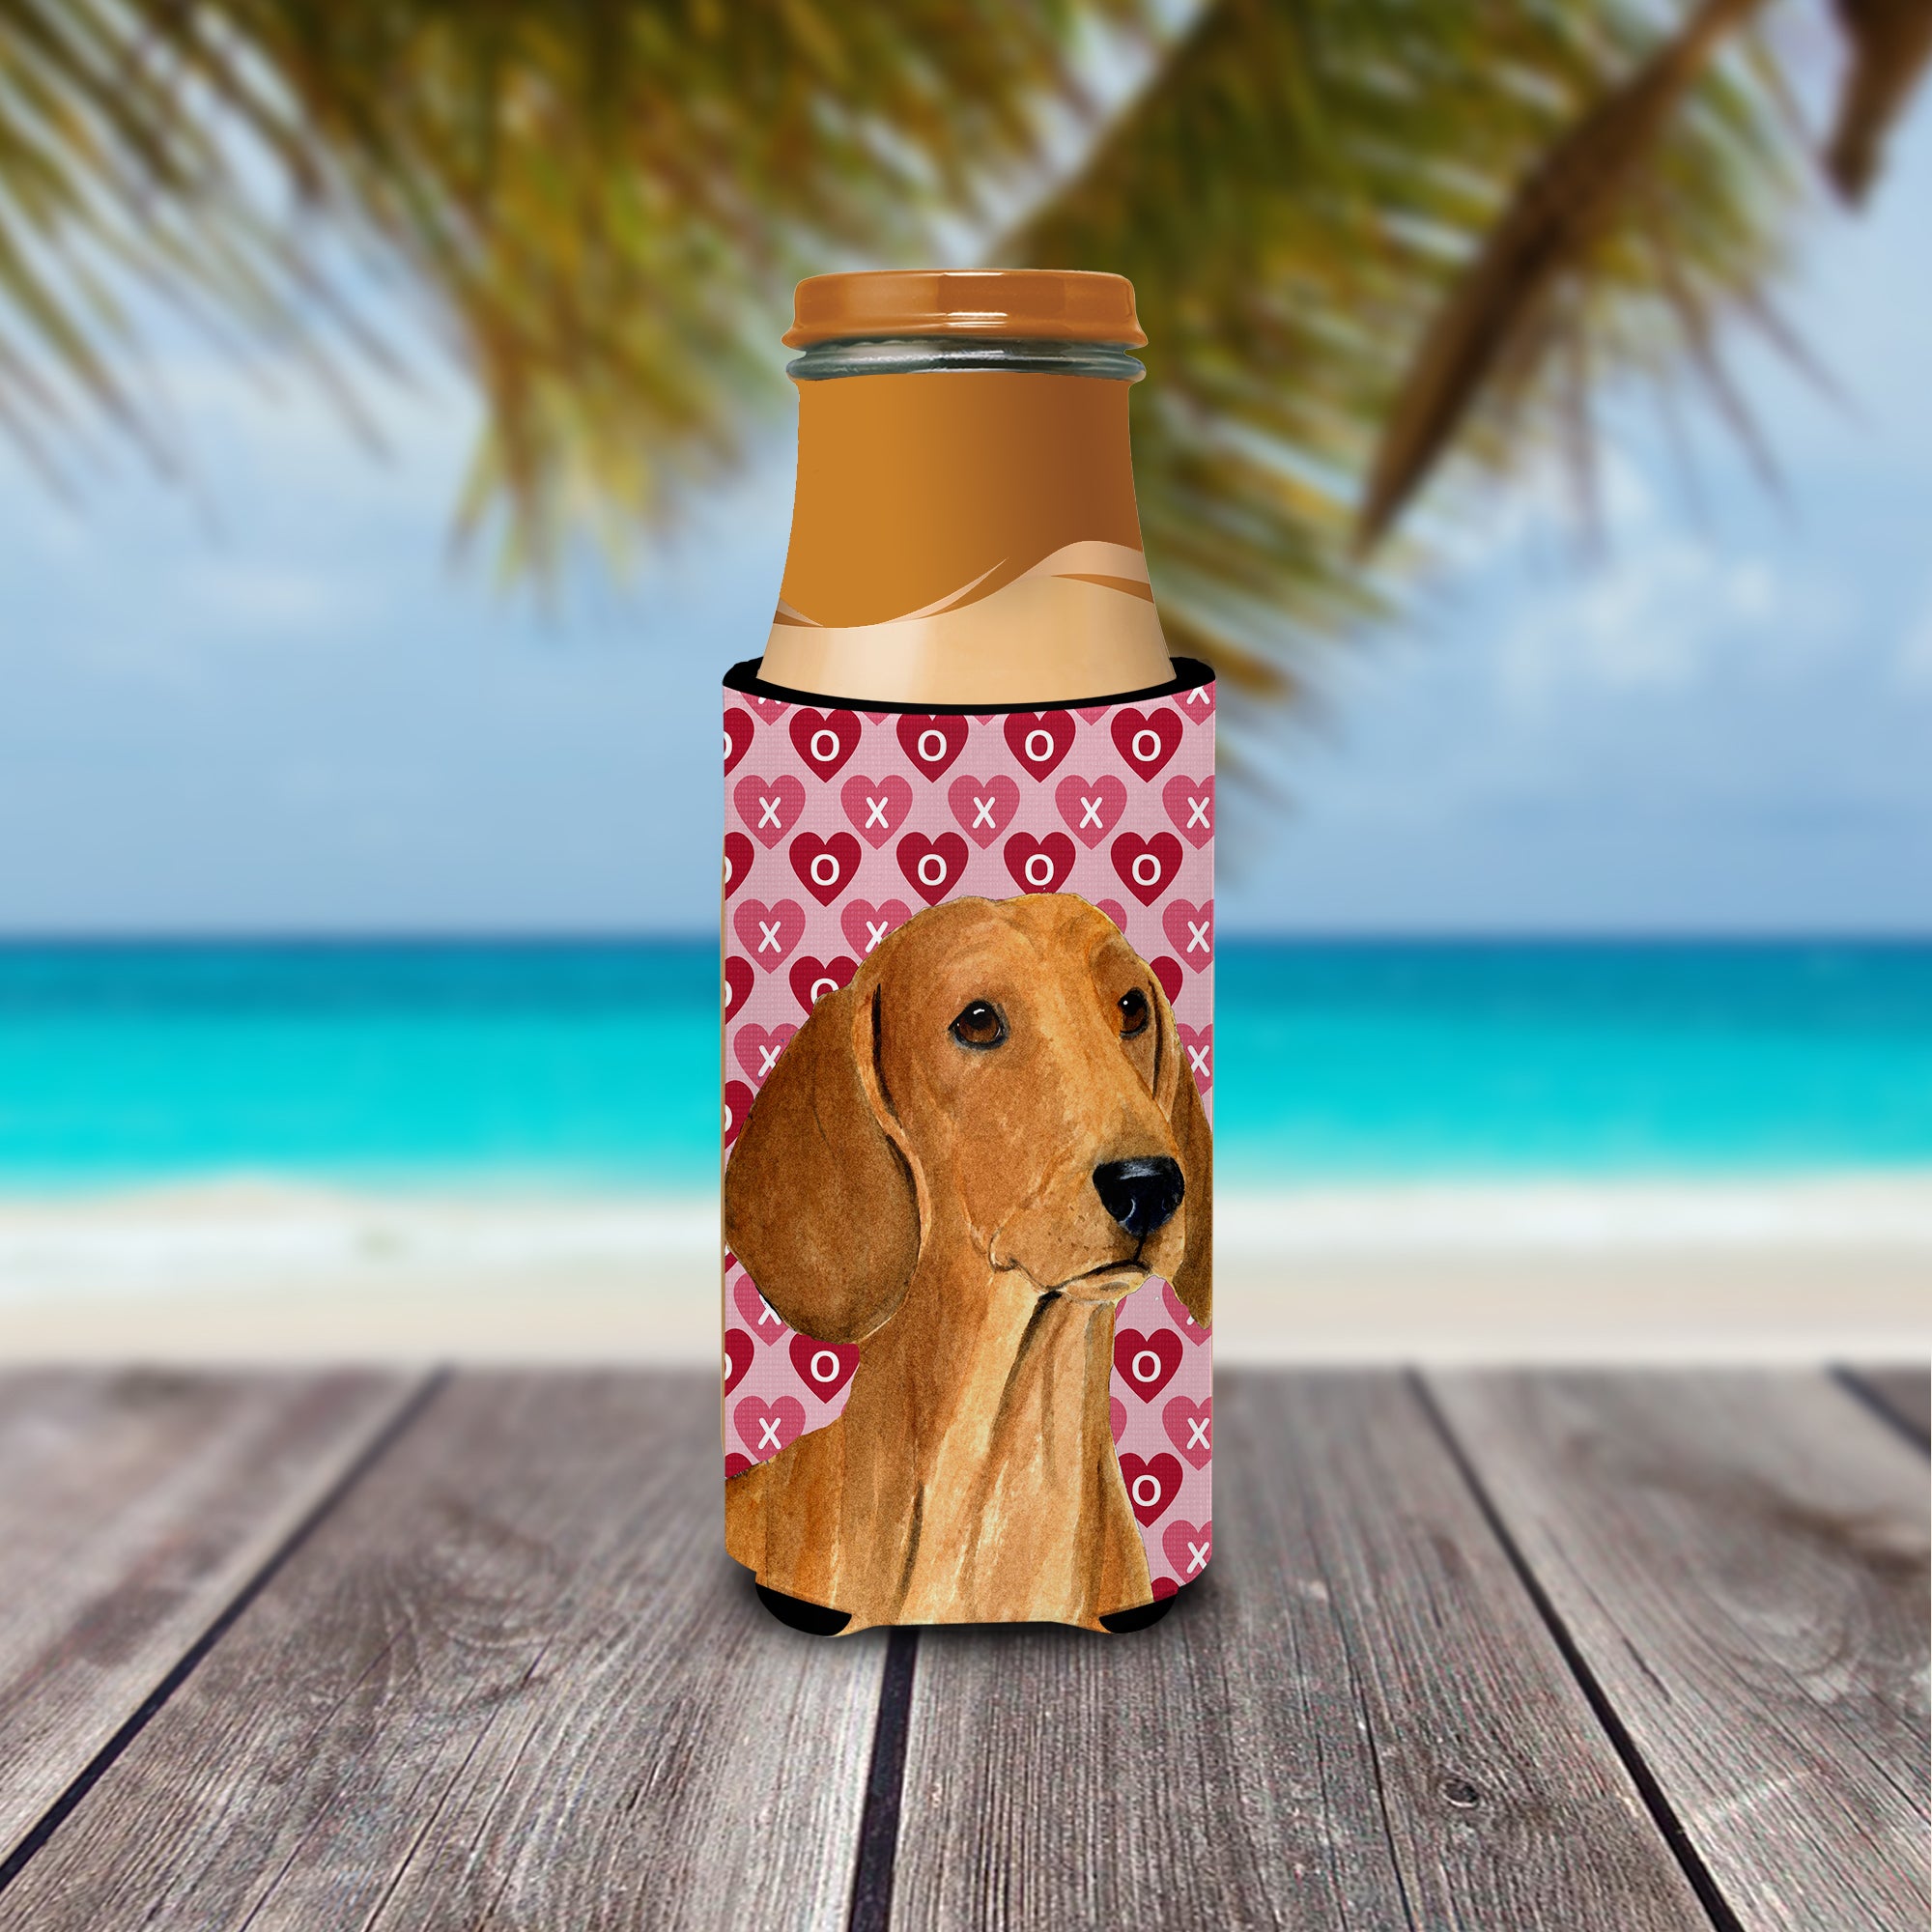 Dachshund Hearts Love and Valentine's Day Portrait Ultra Beverage Insulators for slim cans SS4487MUK.